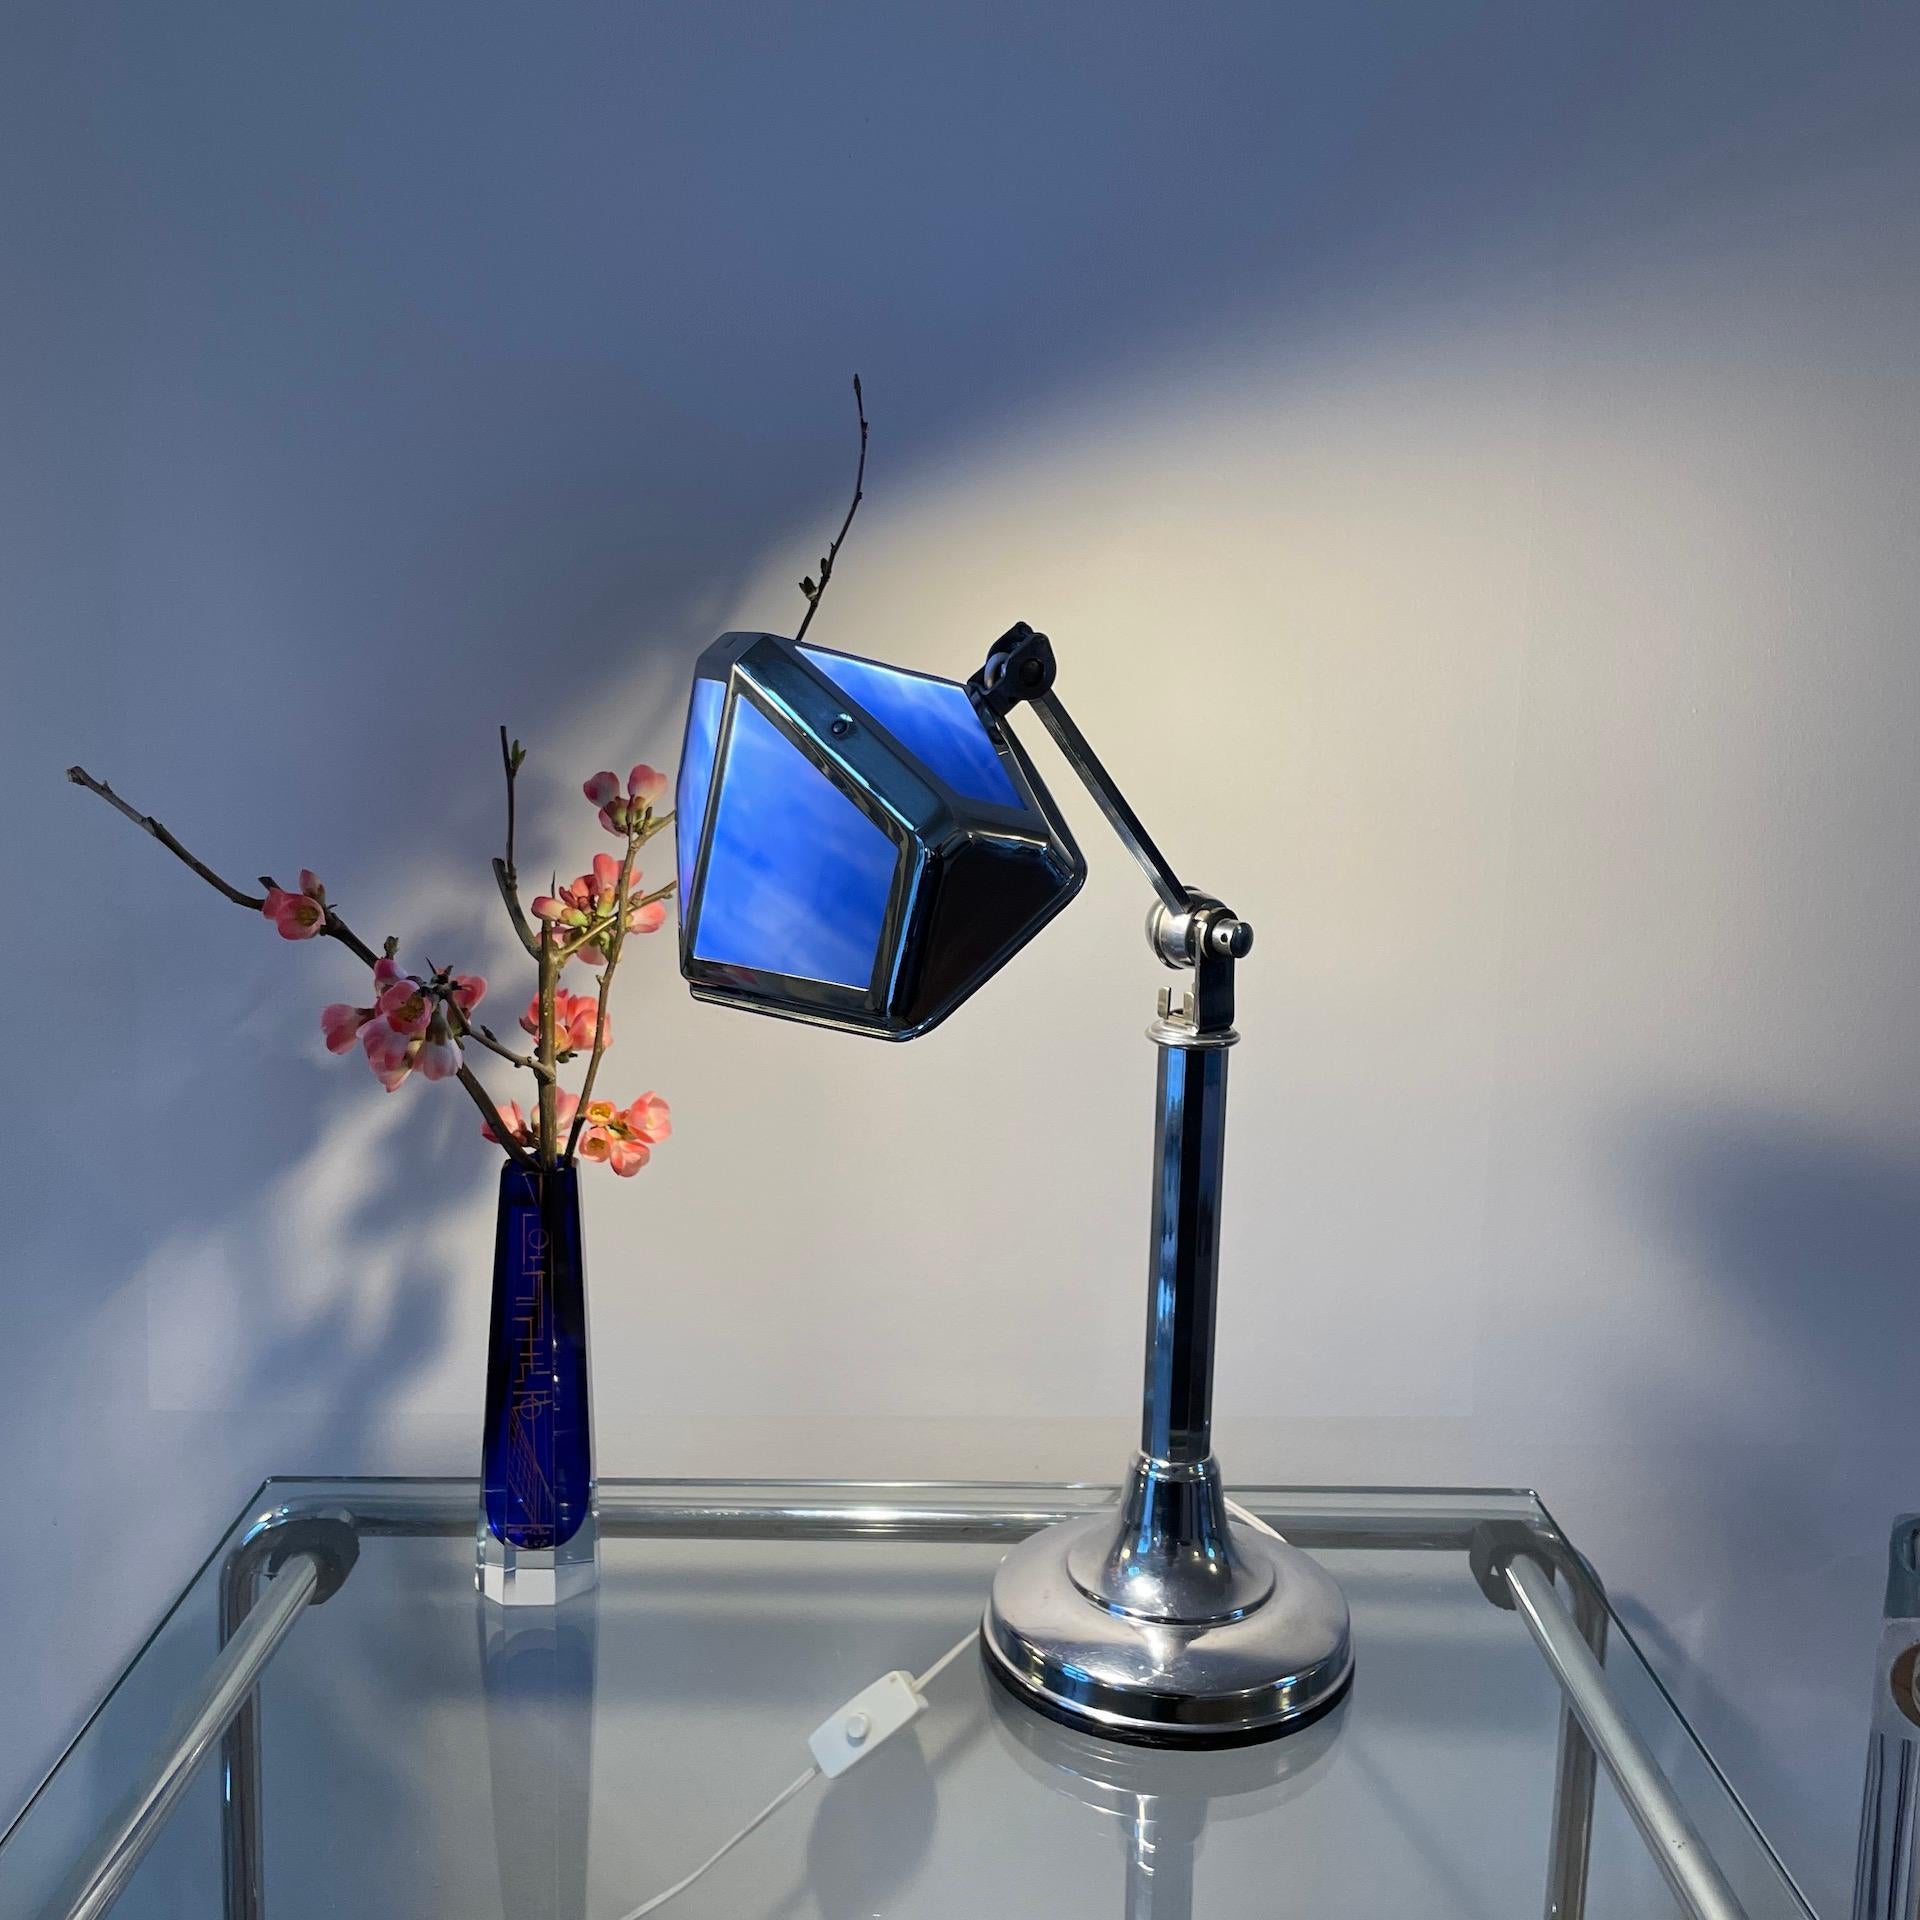 Art deco French table lamp by Pirouett, in chromed brass and blue glass.
This model is the ‘Living Room’ model created in 1938 by the famous French house Pirouett, inventor of the first French articulated office lamps in the 1920s.
Clever and